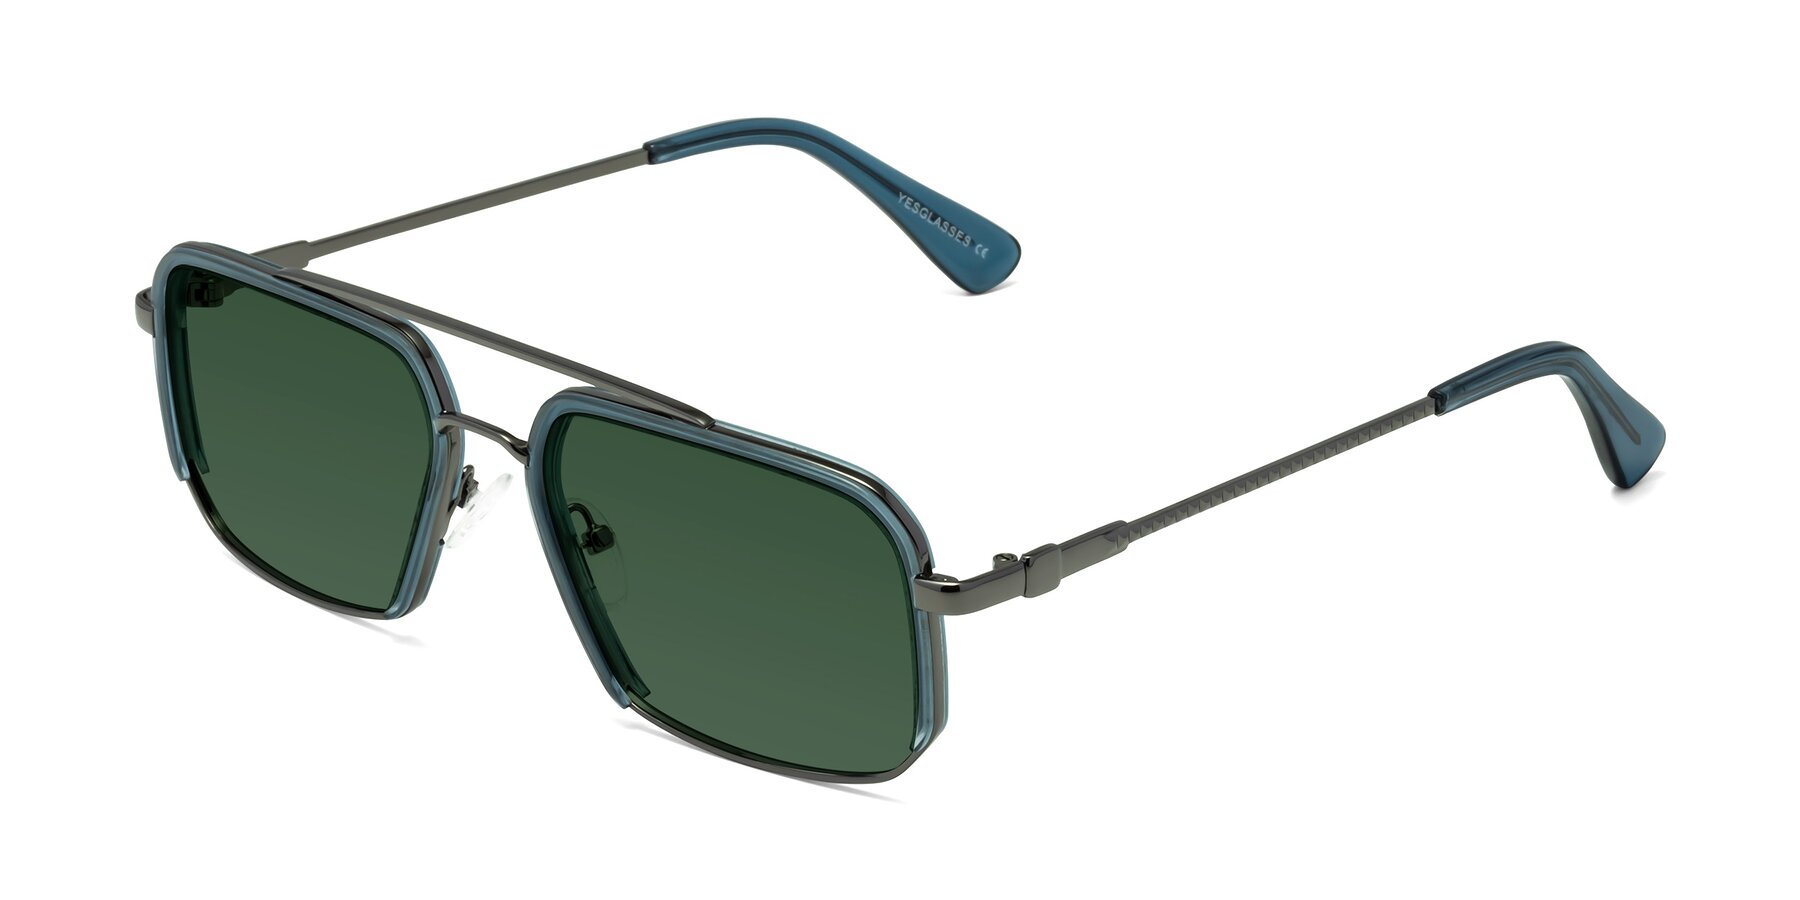 Angle of Dechter in Teal-Gunmetal with Green Tinted Lenses